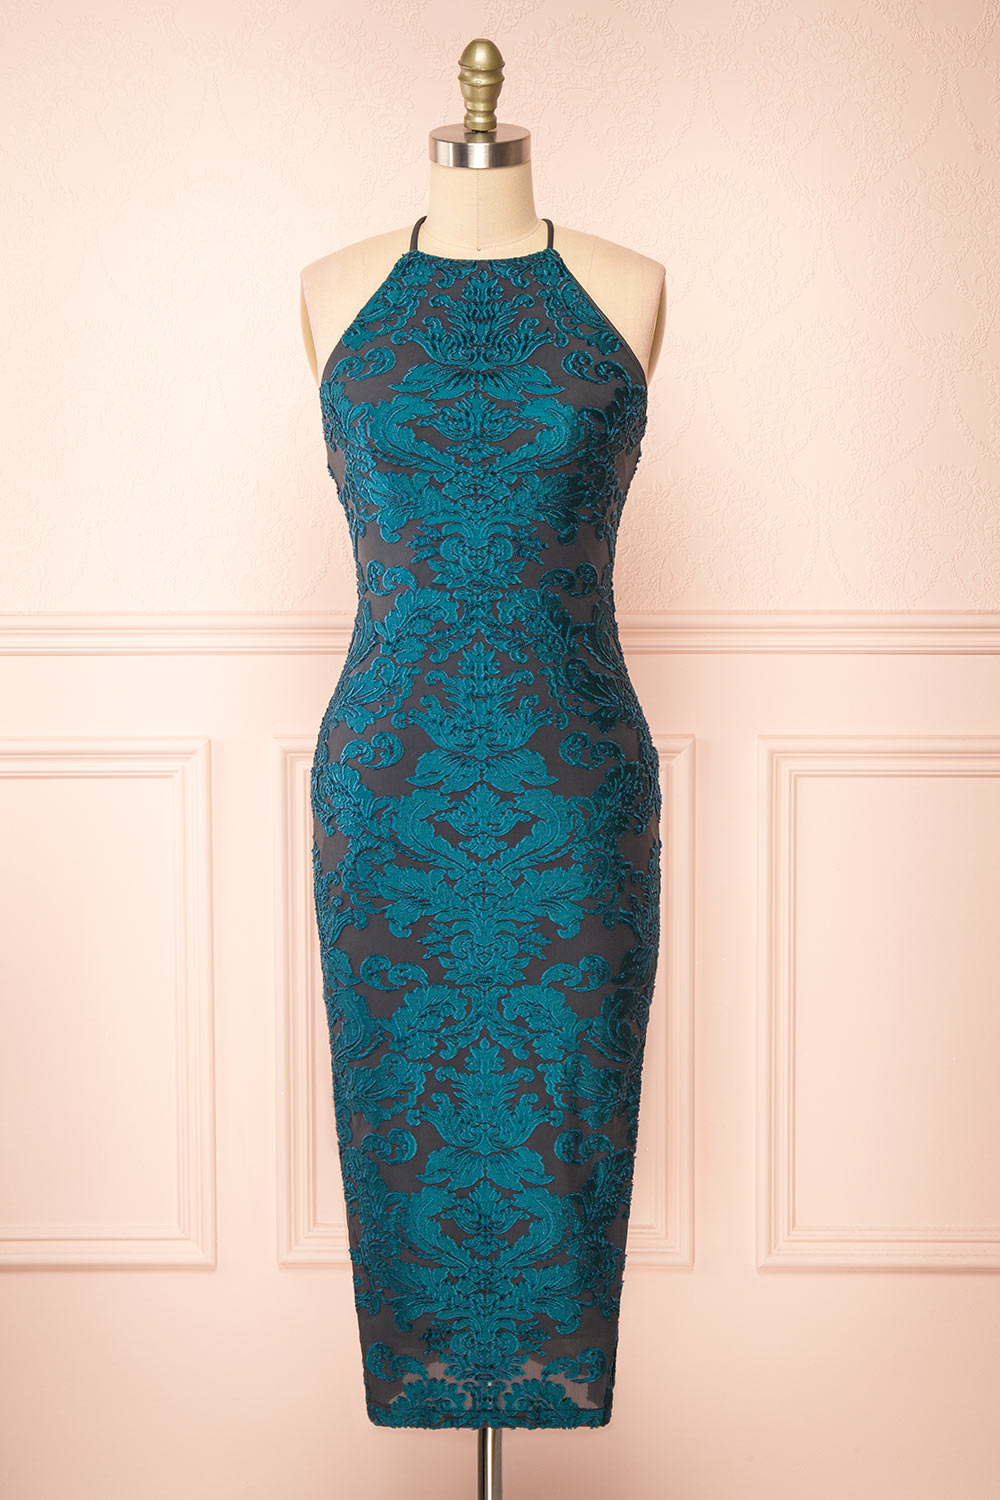 Styel Teal Textured Halter Midi Dress | Boutique 1861 front view 